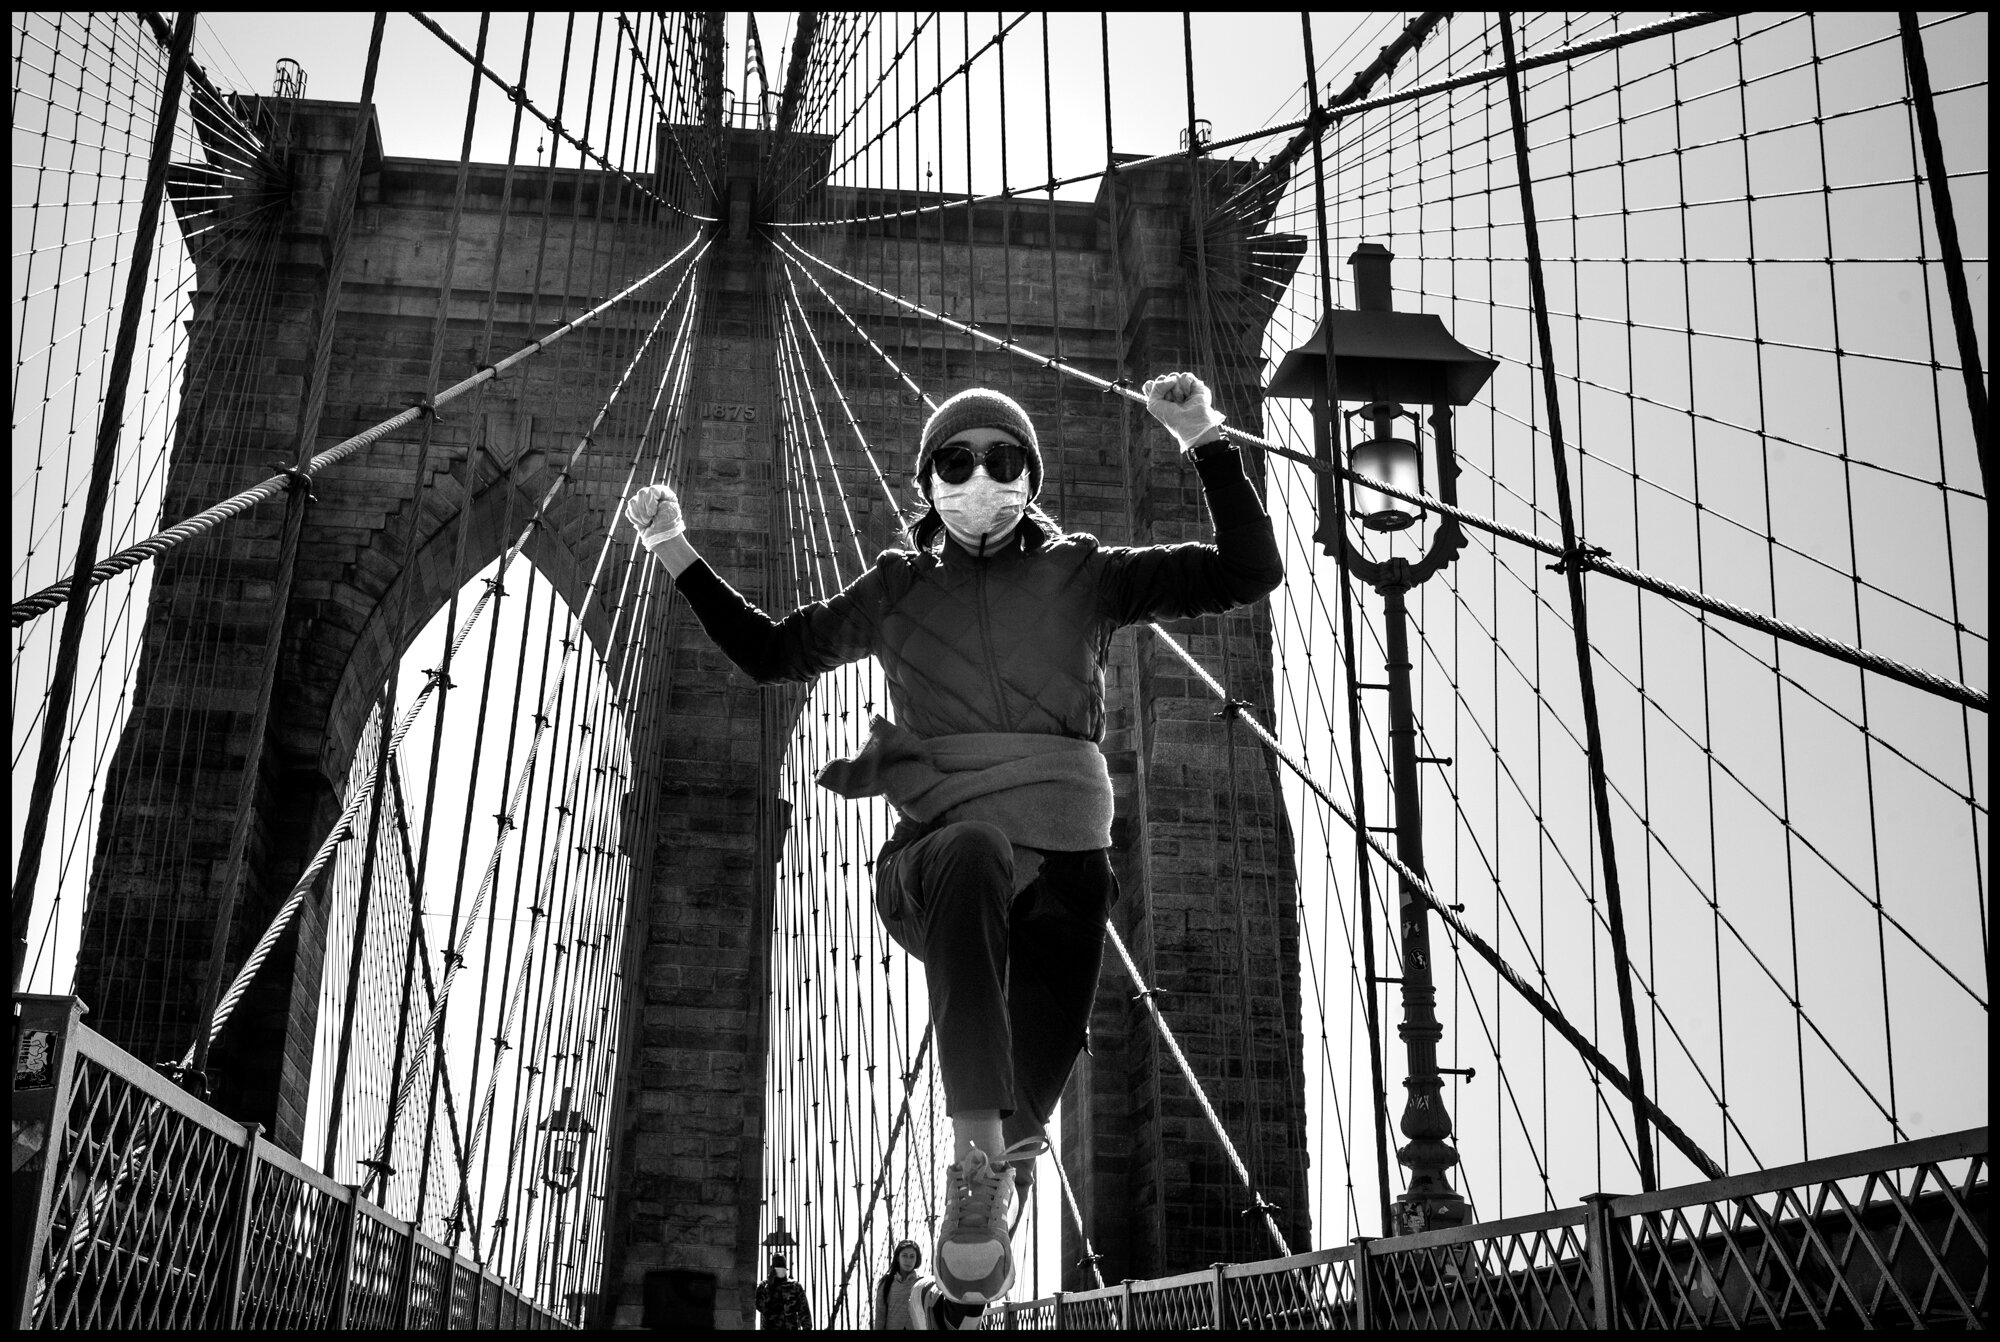  Yanan, a 30 year old woman from Wuhan, China, living in New York, goes out for a jog across the Brooklyn Bridge.  March 26, 2020 © Peter Turnley.   ID# 04-001 